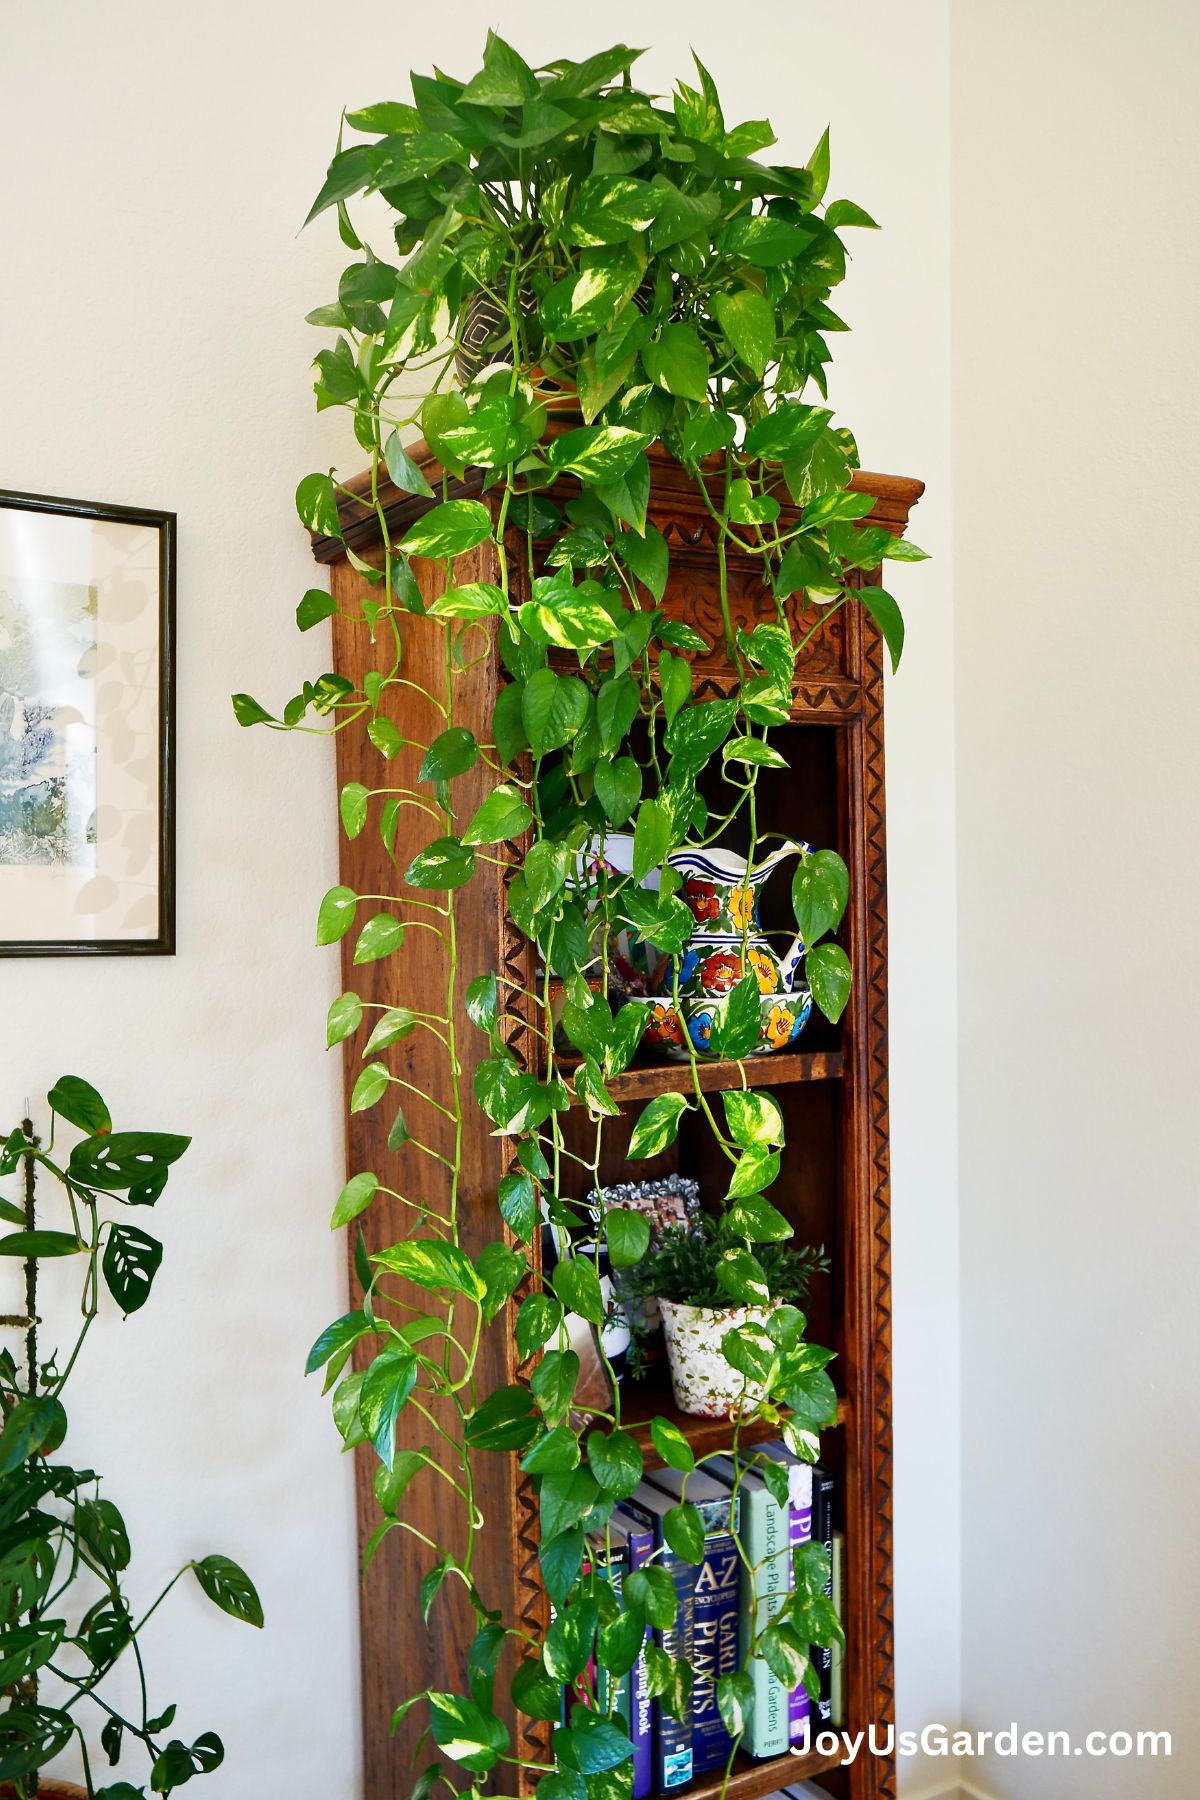 golden pothos grows indoors atop a tall bookshelf, trails of pothos trail down